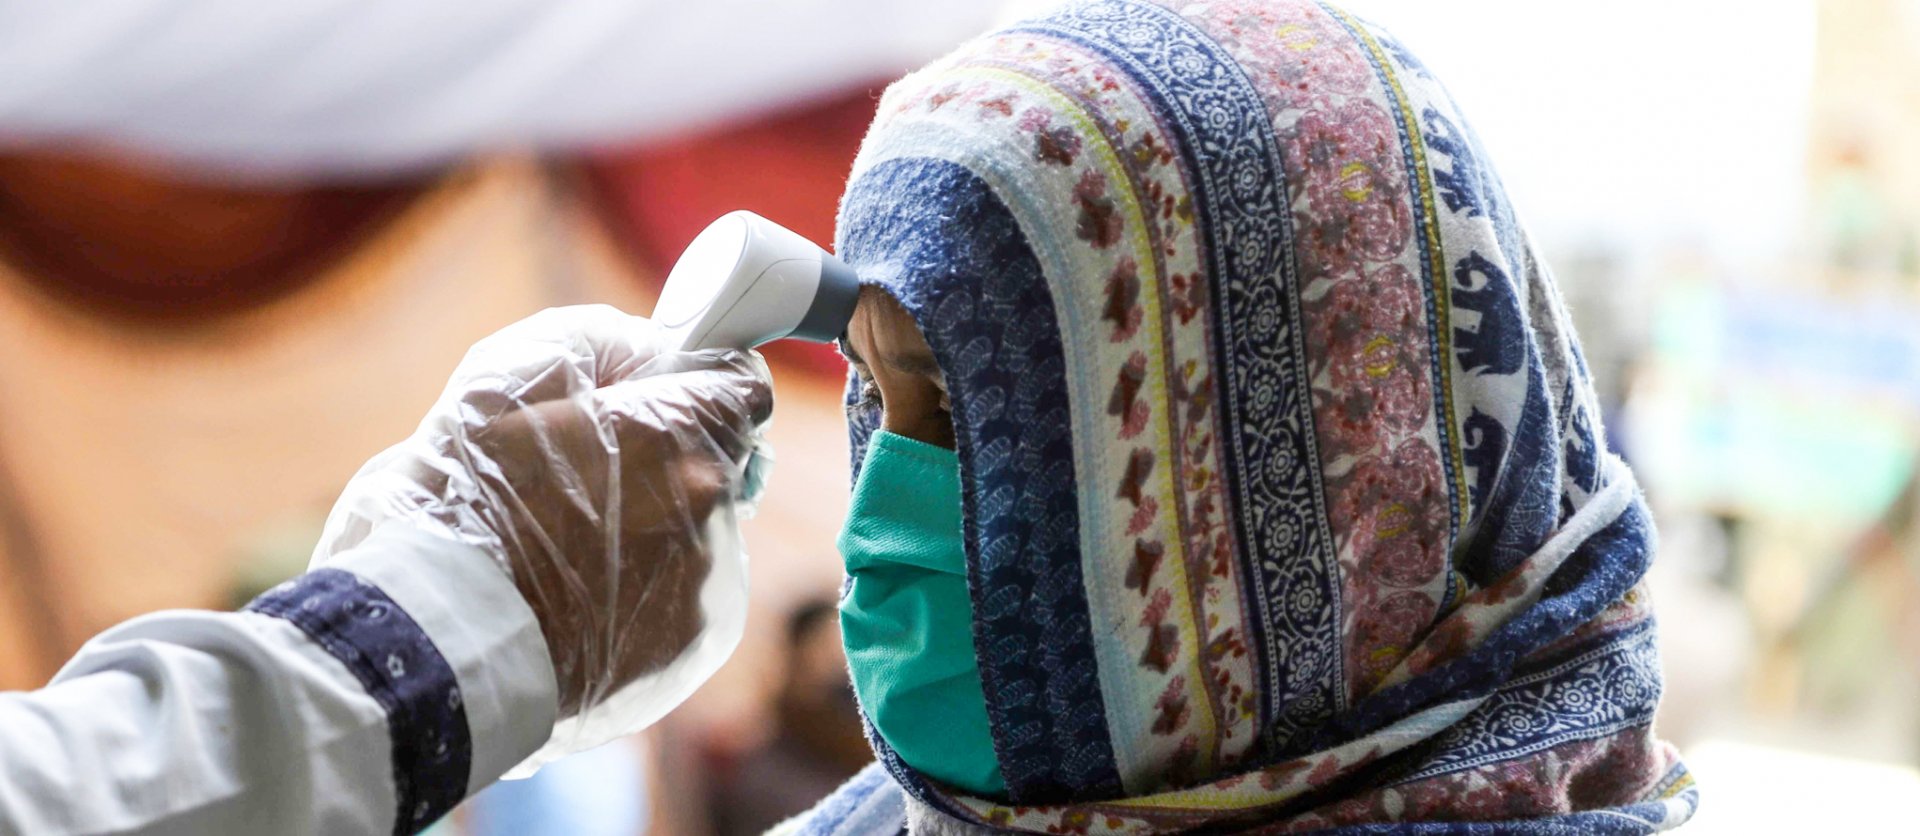 Woman in Pakistan getting her temperature checked on her forehead